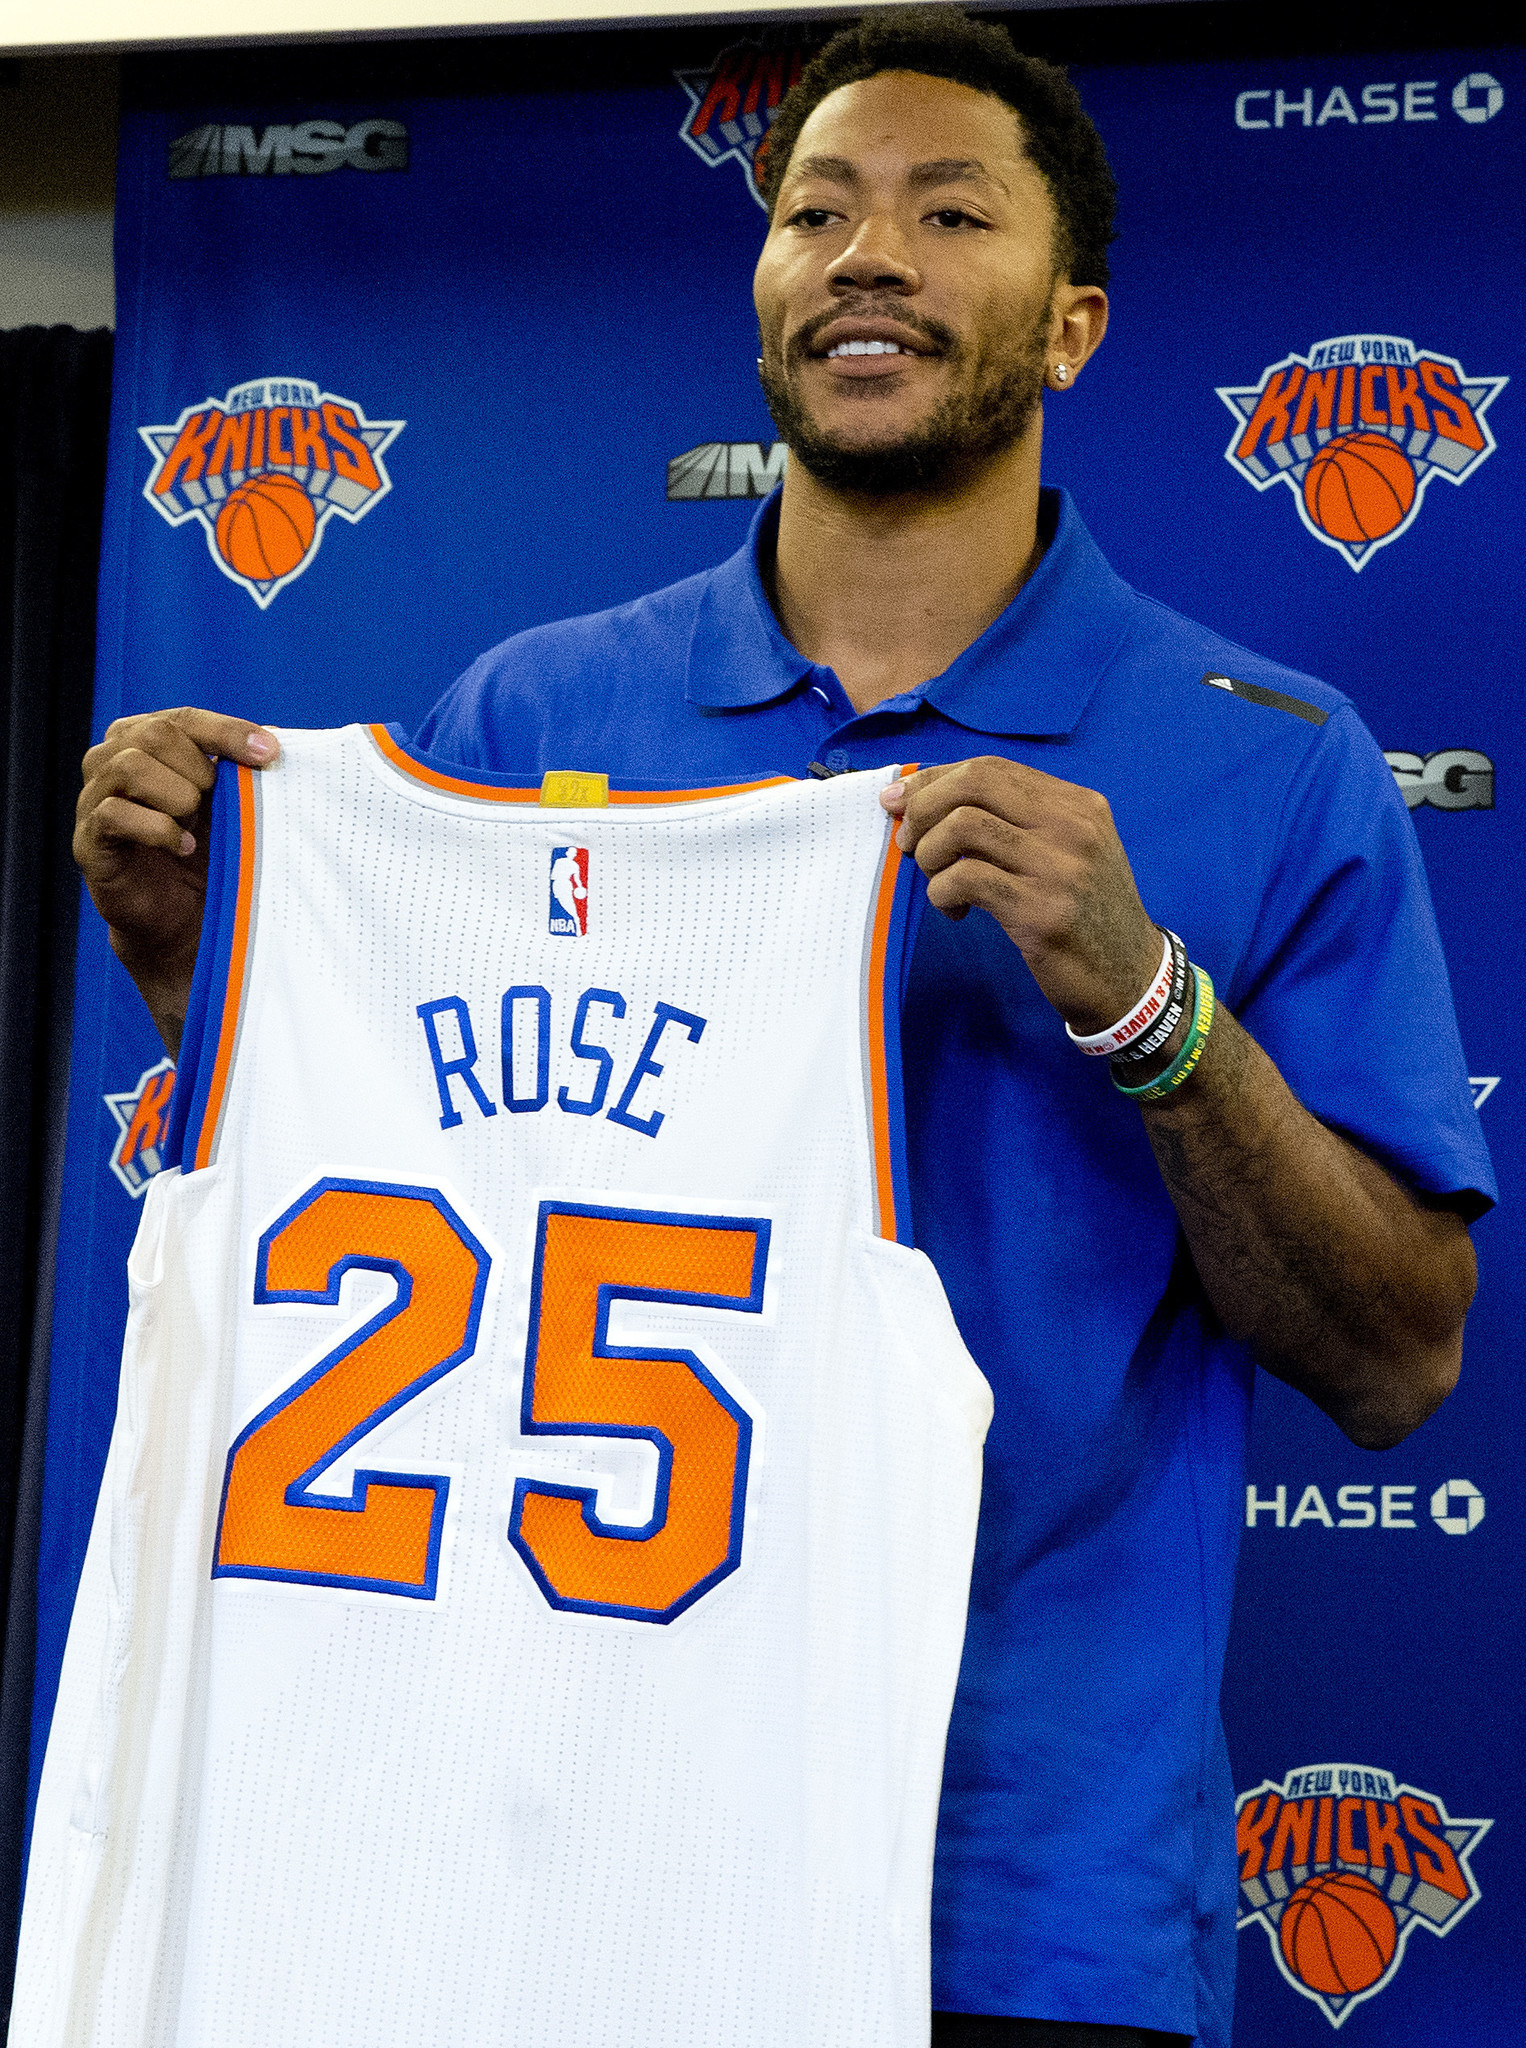 Derrick Rose is excited to be a Knick, even as he looks back at Chicago - Chicago Tribune1526 x 2048